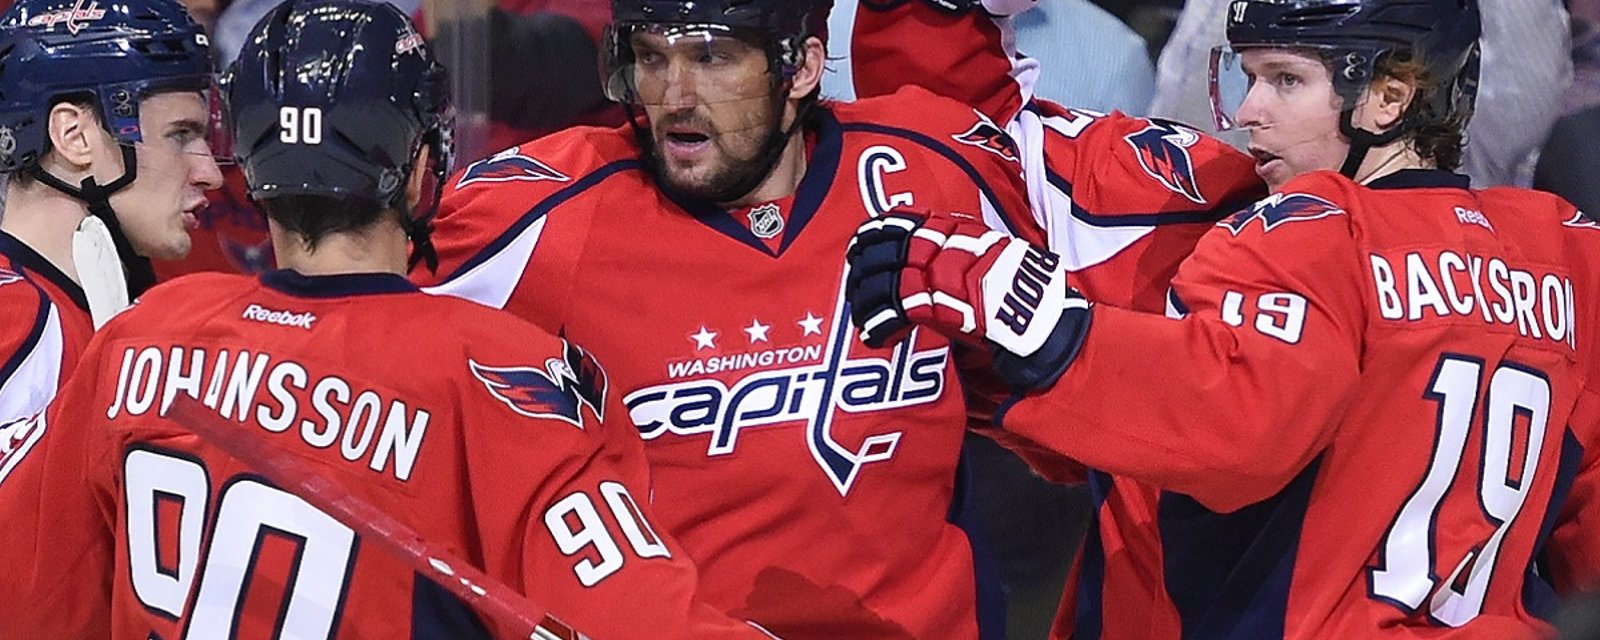 Alex Ovechkin scores his 1000th career point with a must goal against the Penguins!